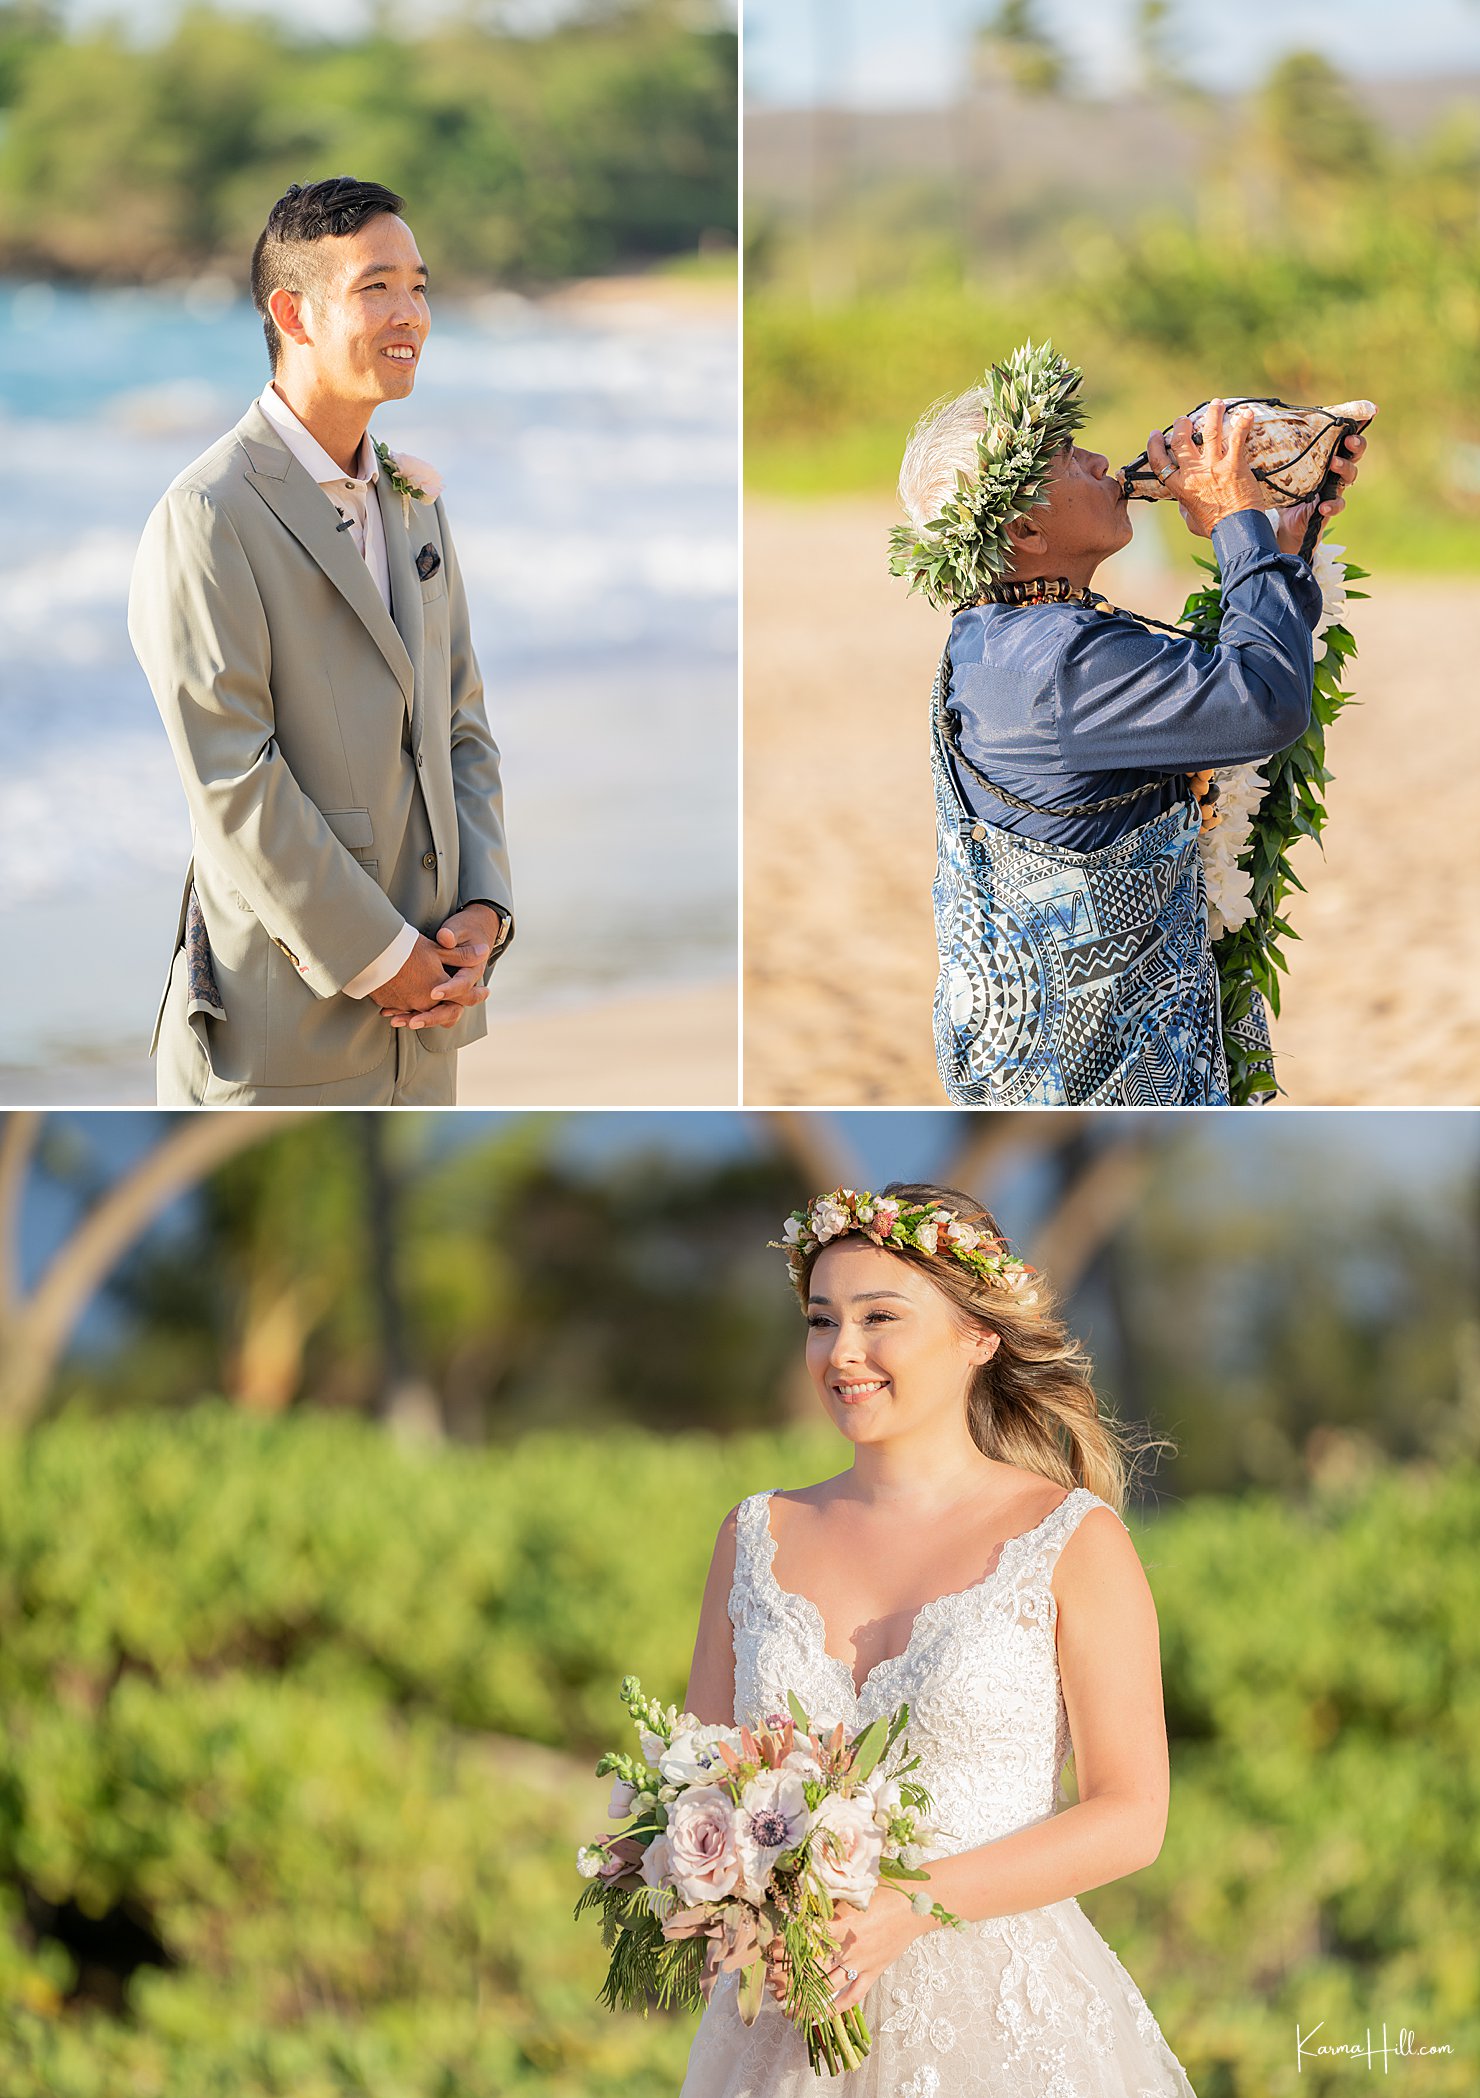 elope in maui